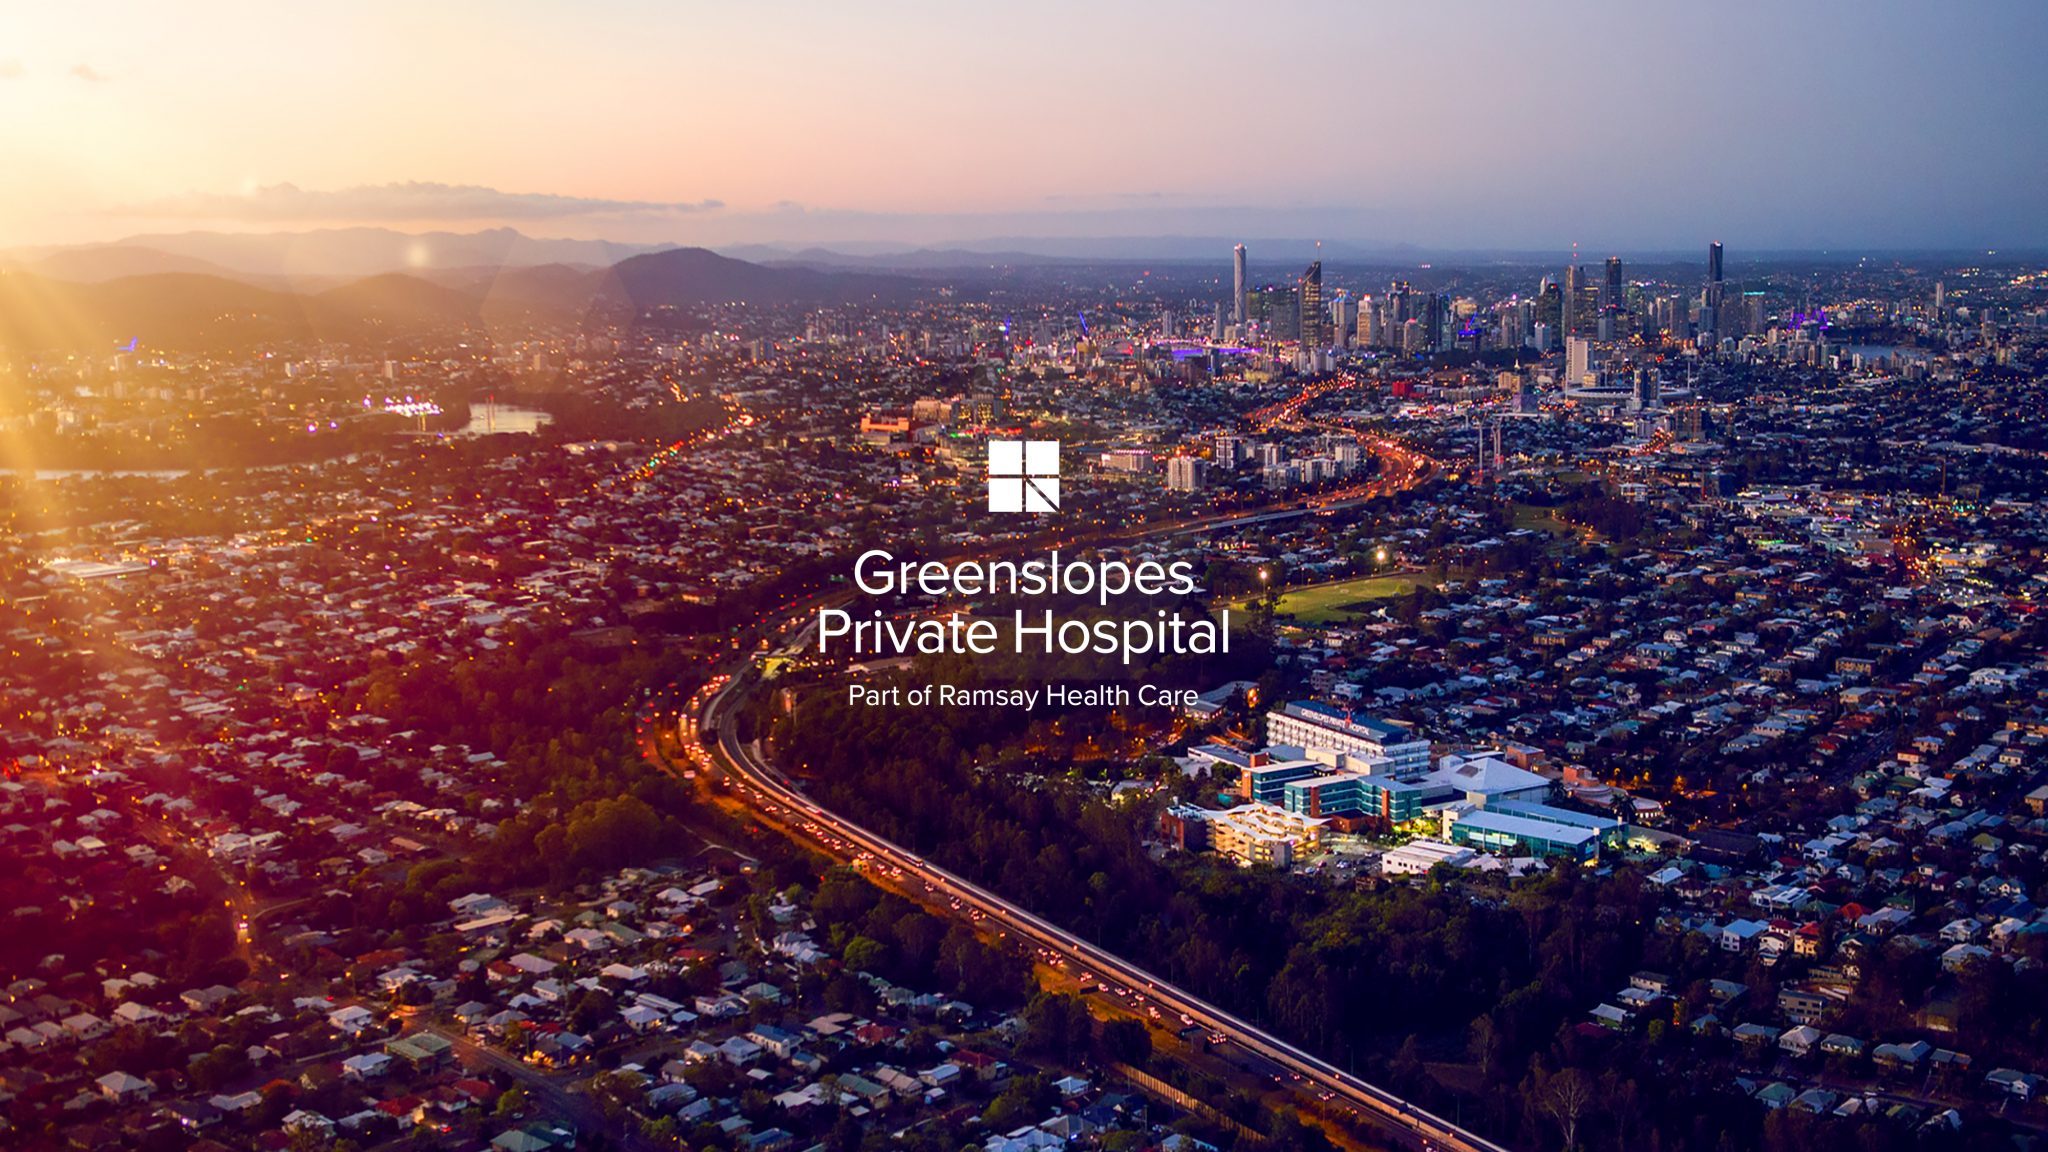 Awareness Campaign by Alike Agency for Greenslopes Private Hospital